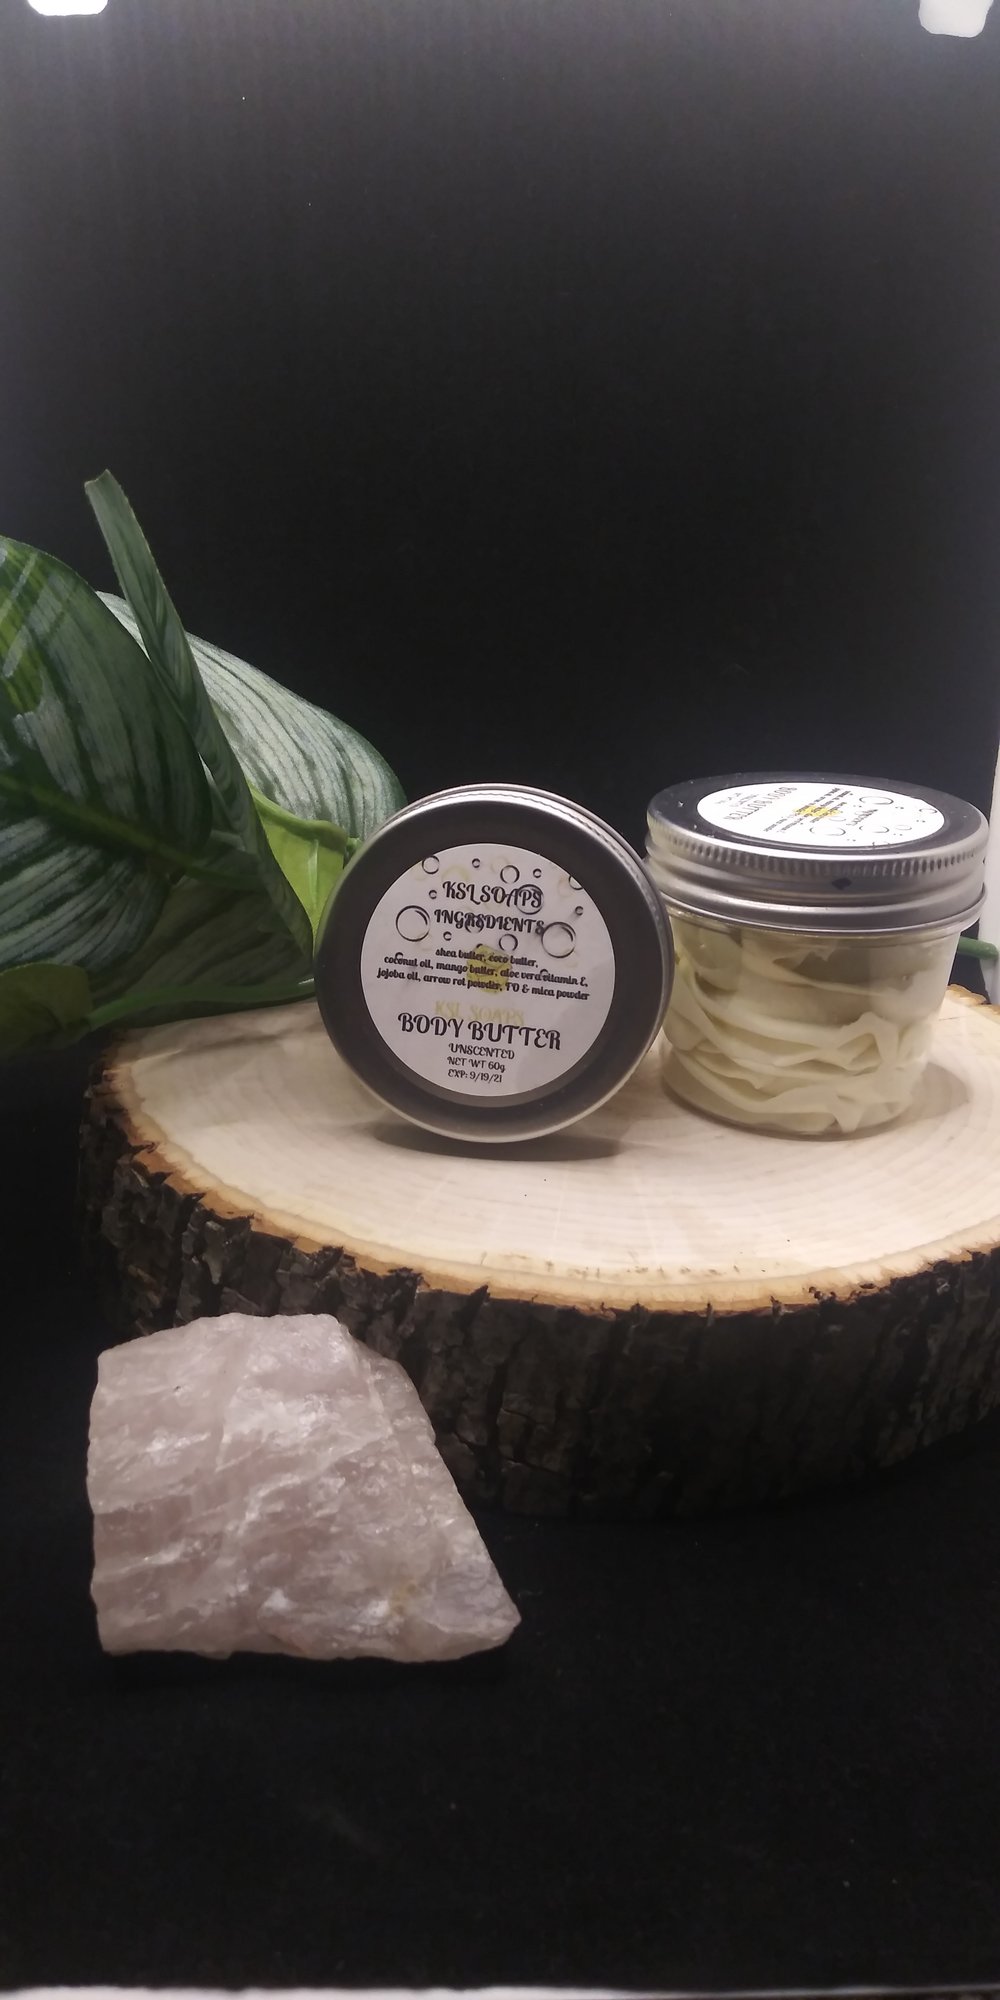 UNSCENTED BODY BUTTER